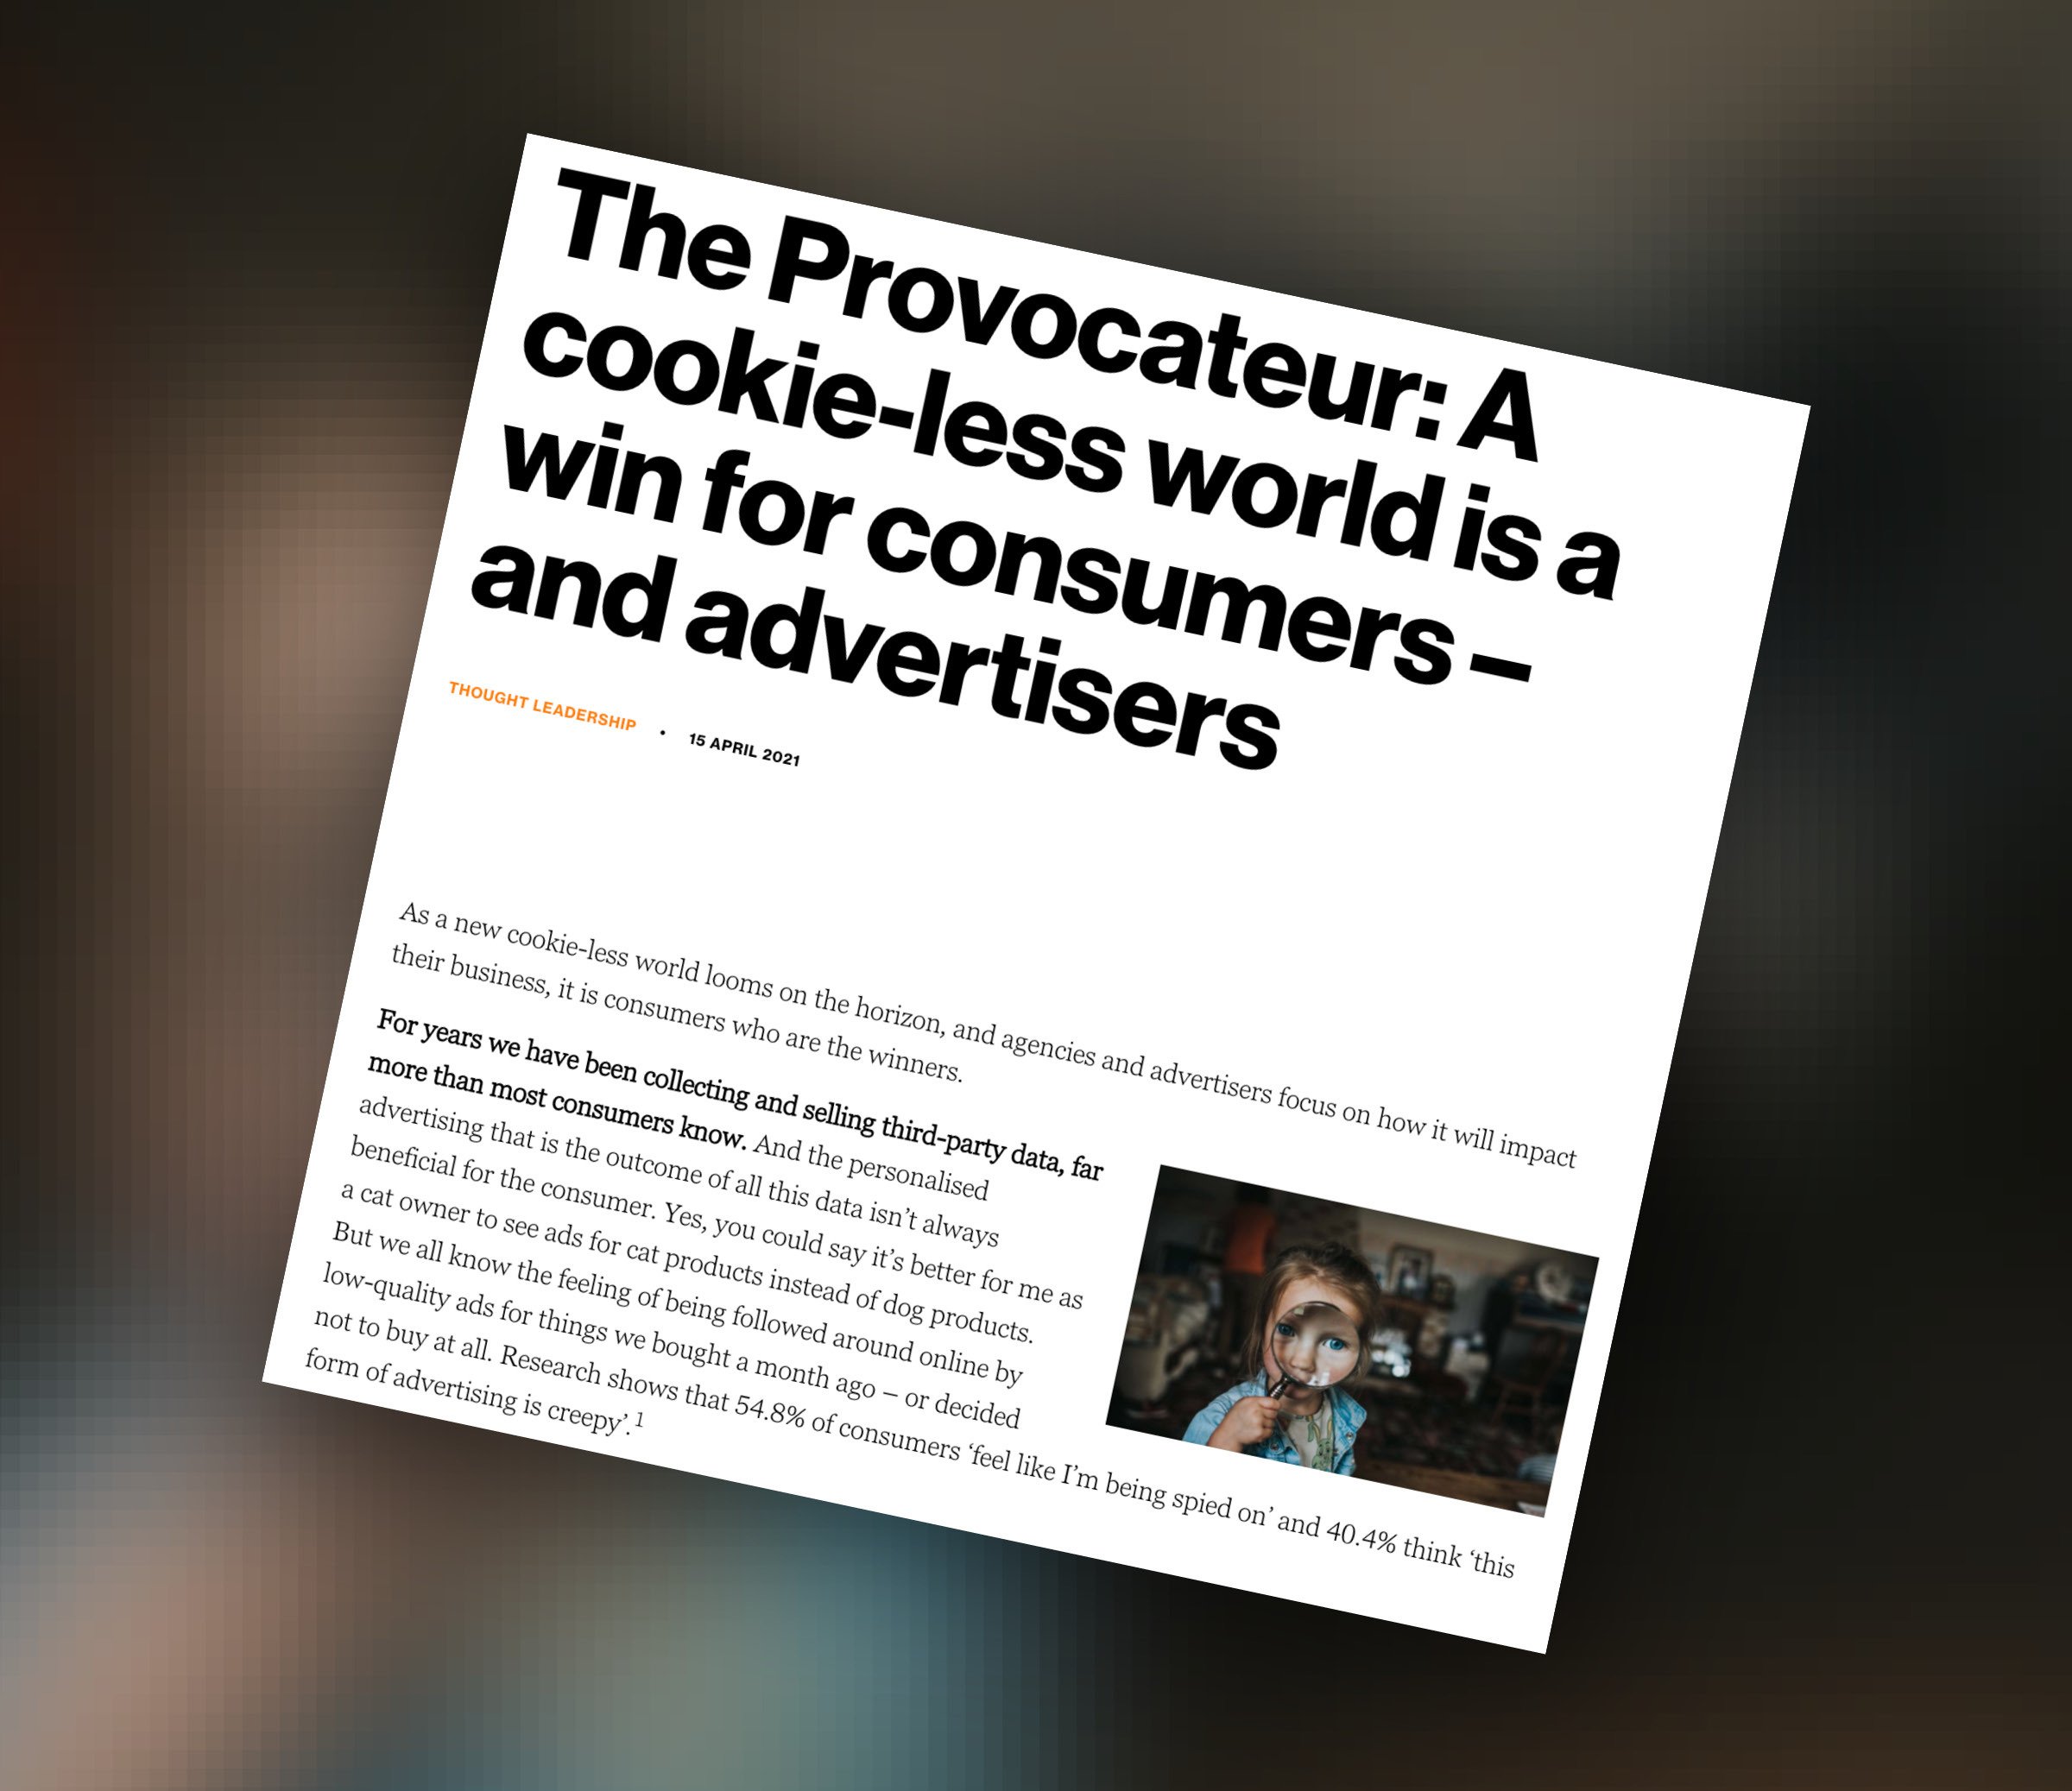 Wavemaker Global: The Provocateur: A Cookie-less World Is A Win For Consumers – And Advertisers